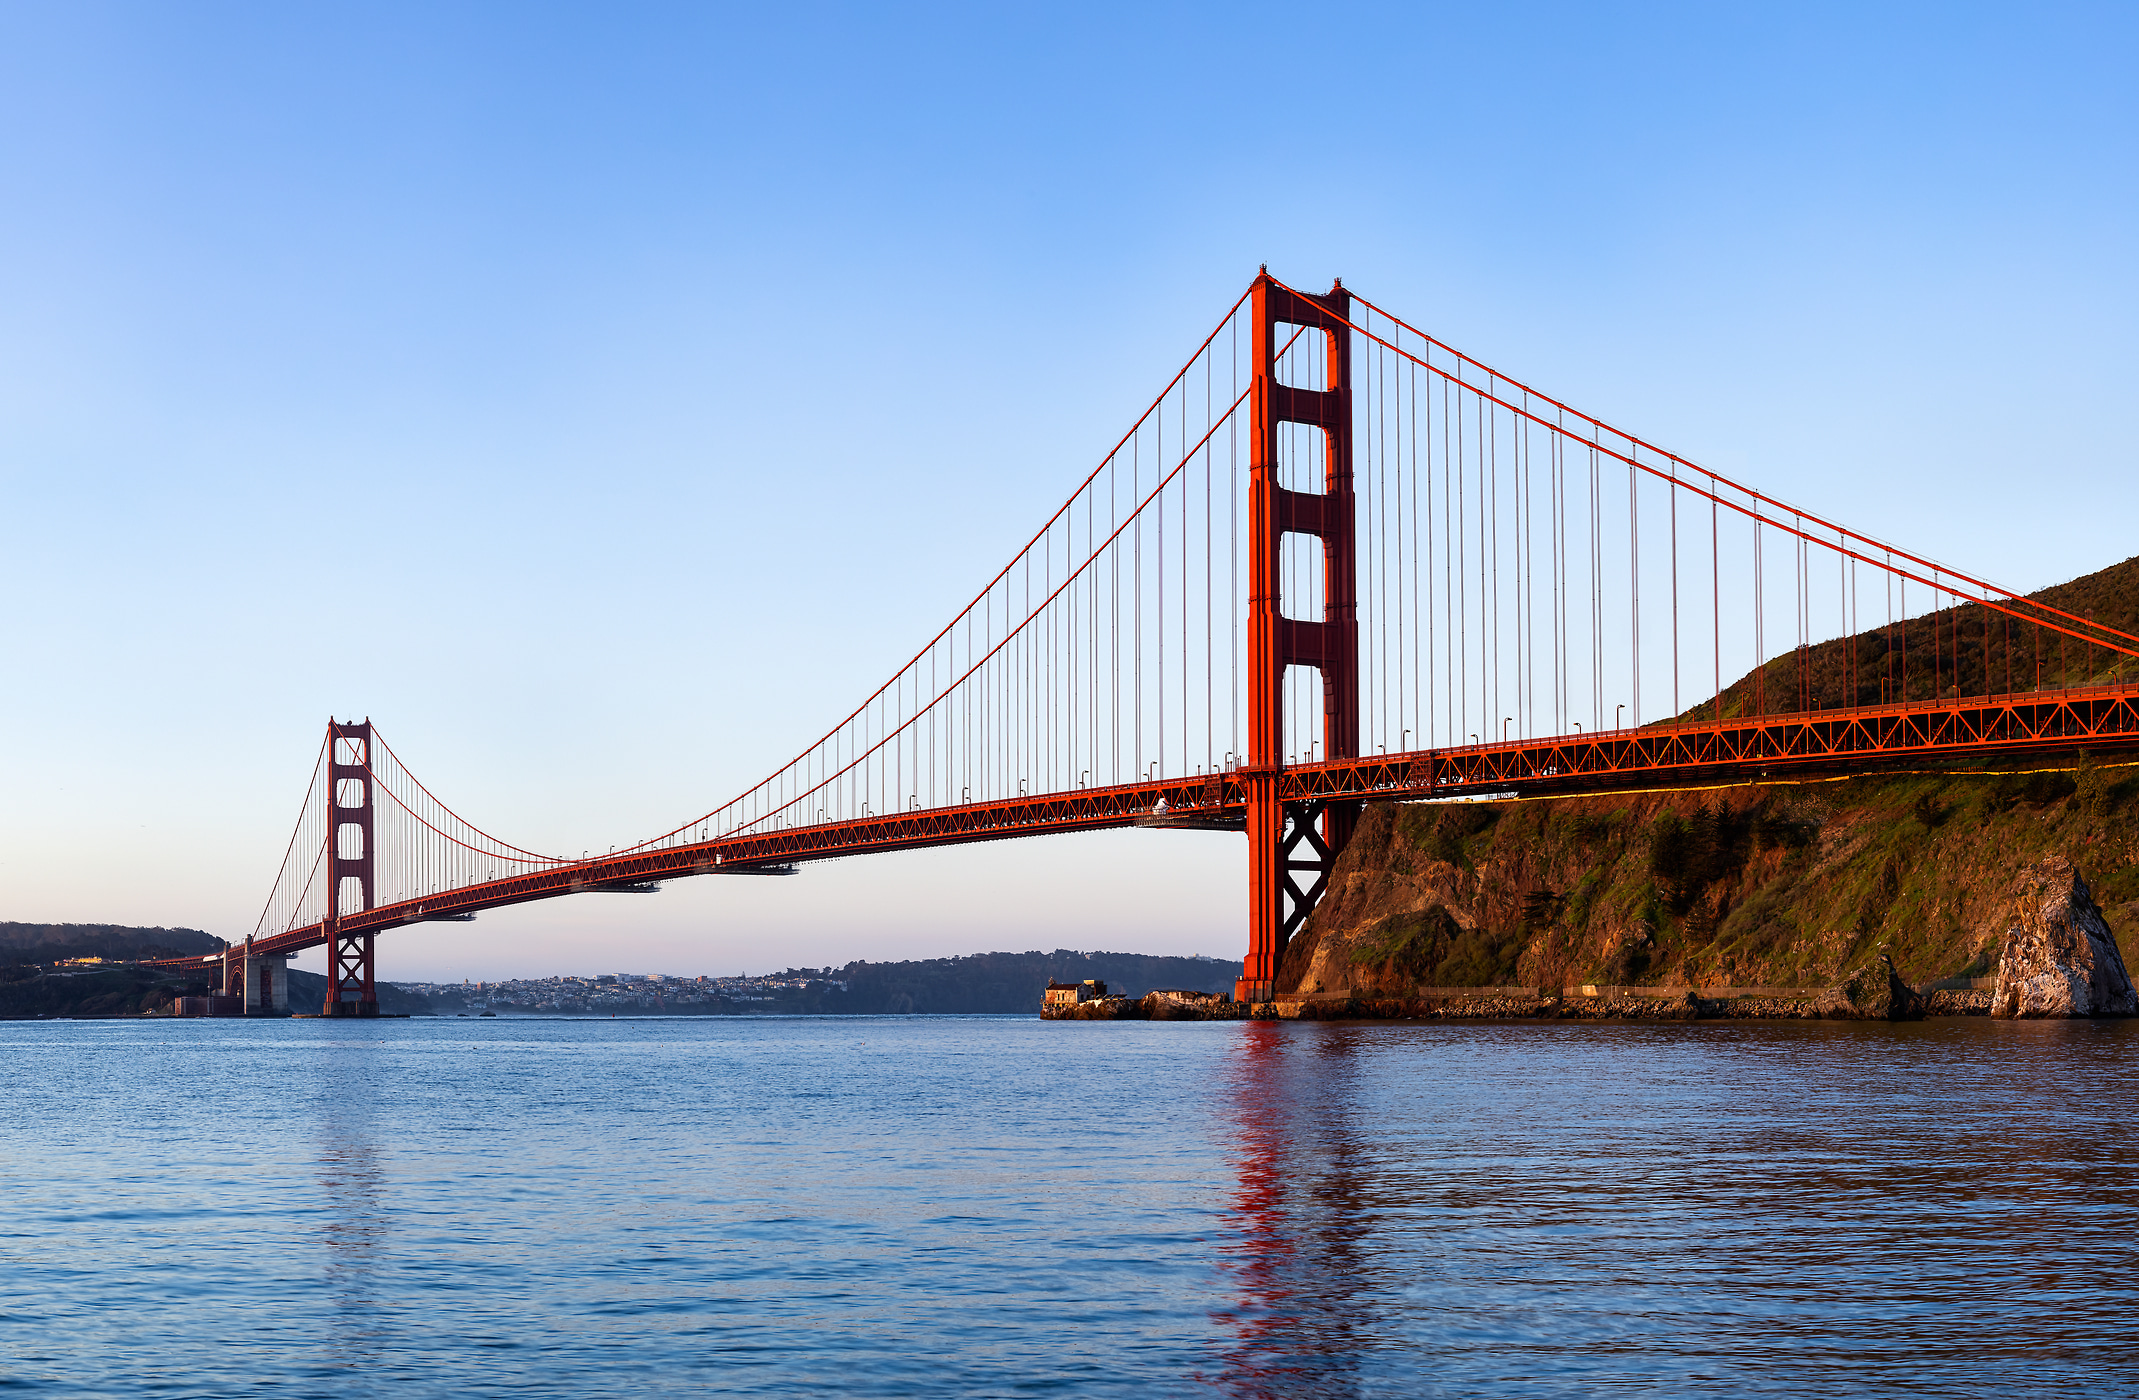 248 megapixels! A very high resolution, large-format VAST photo print of the Golden Gate Bridge; architecture photograph created by Nicholas Gonzales in Horseshoe Bay, Sausalito, California